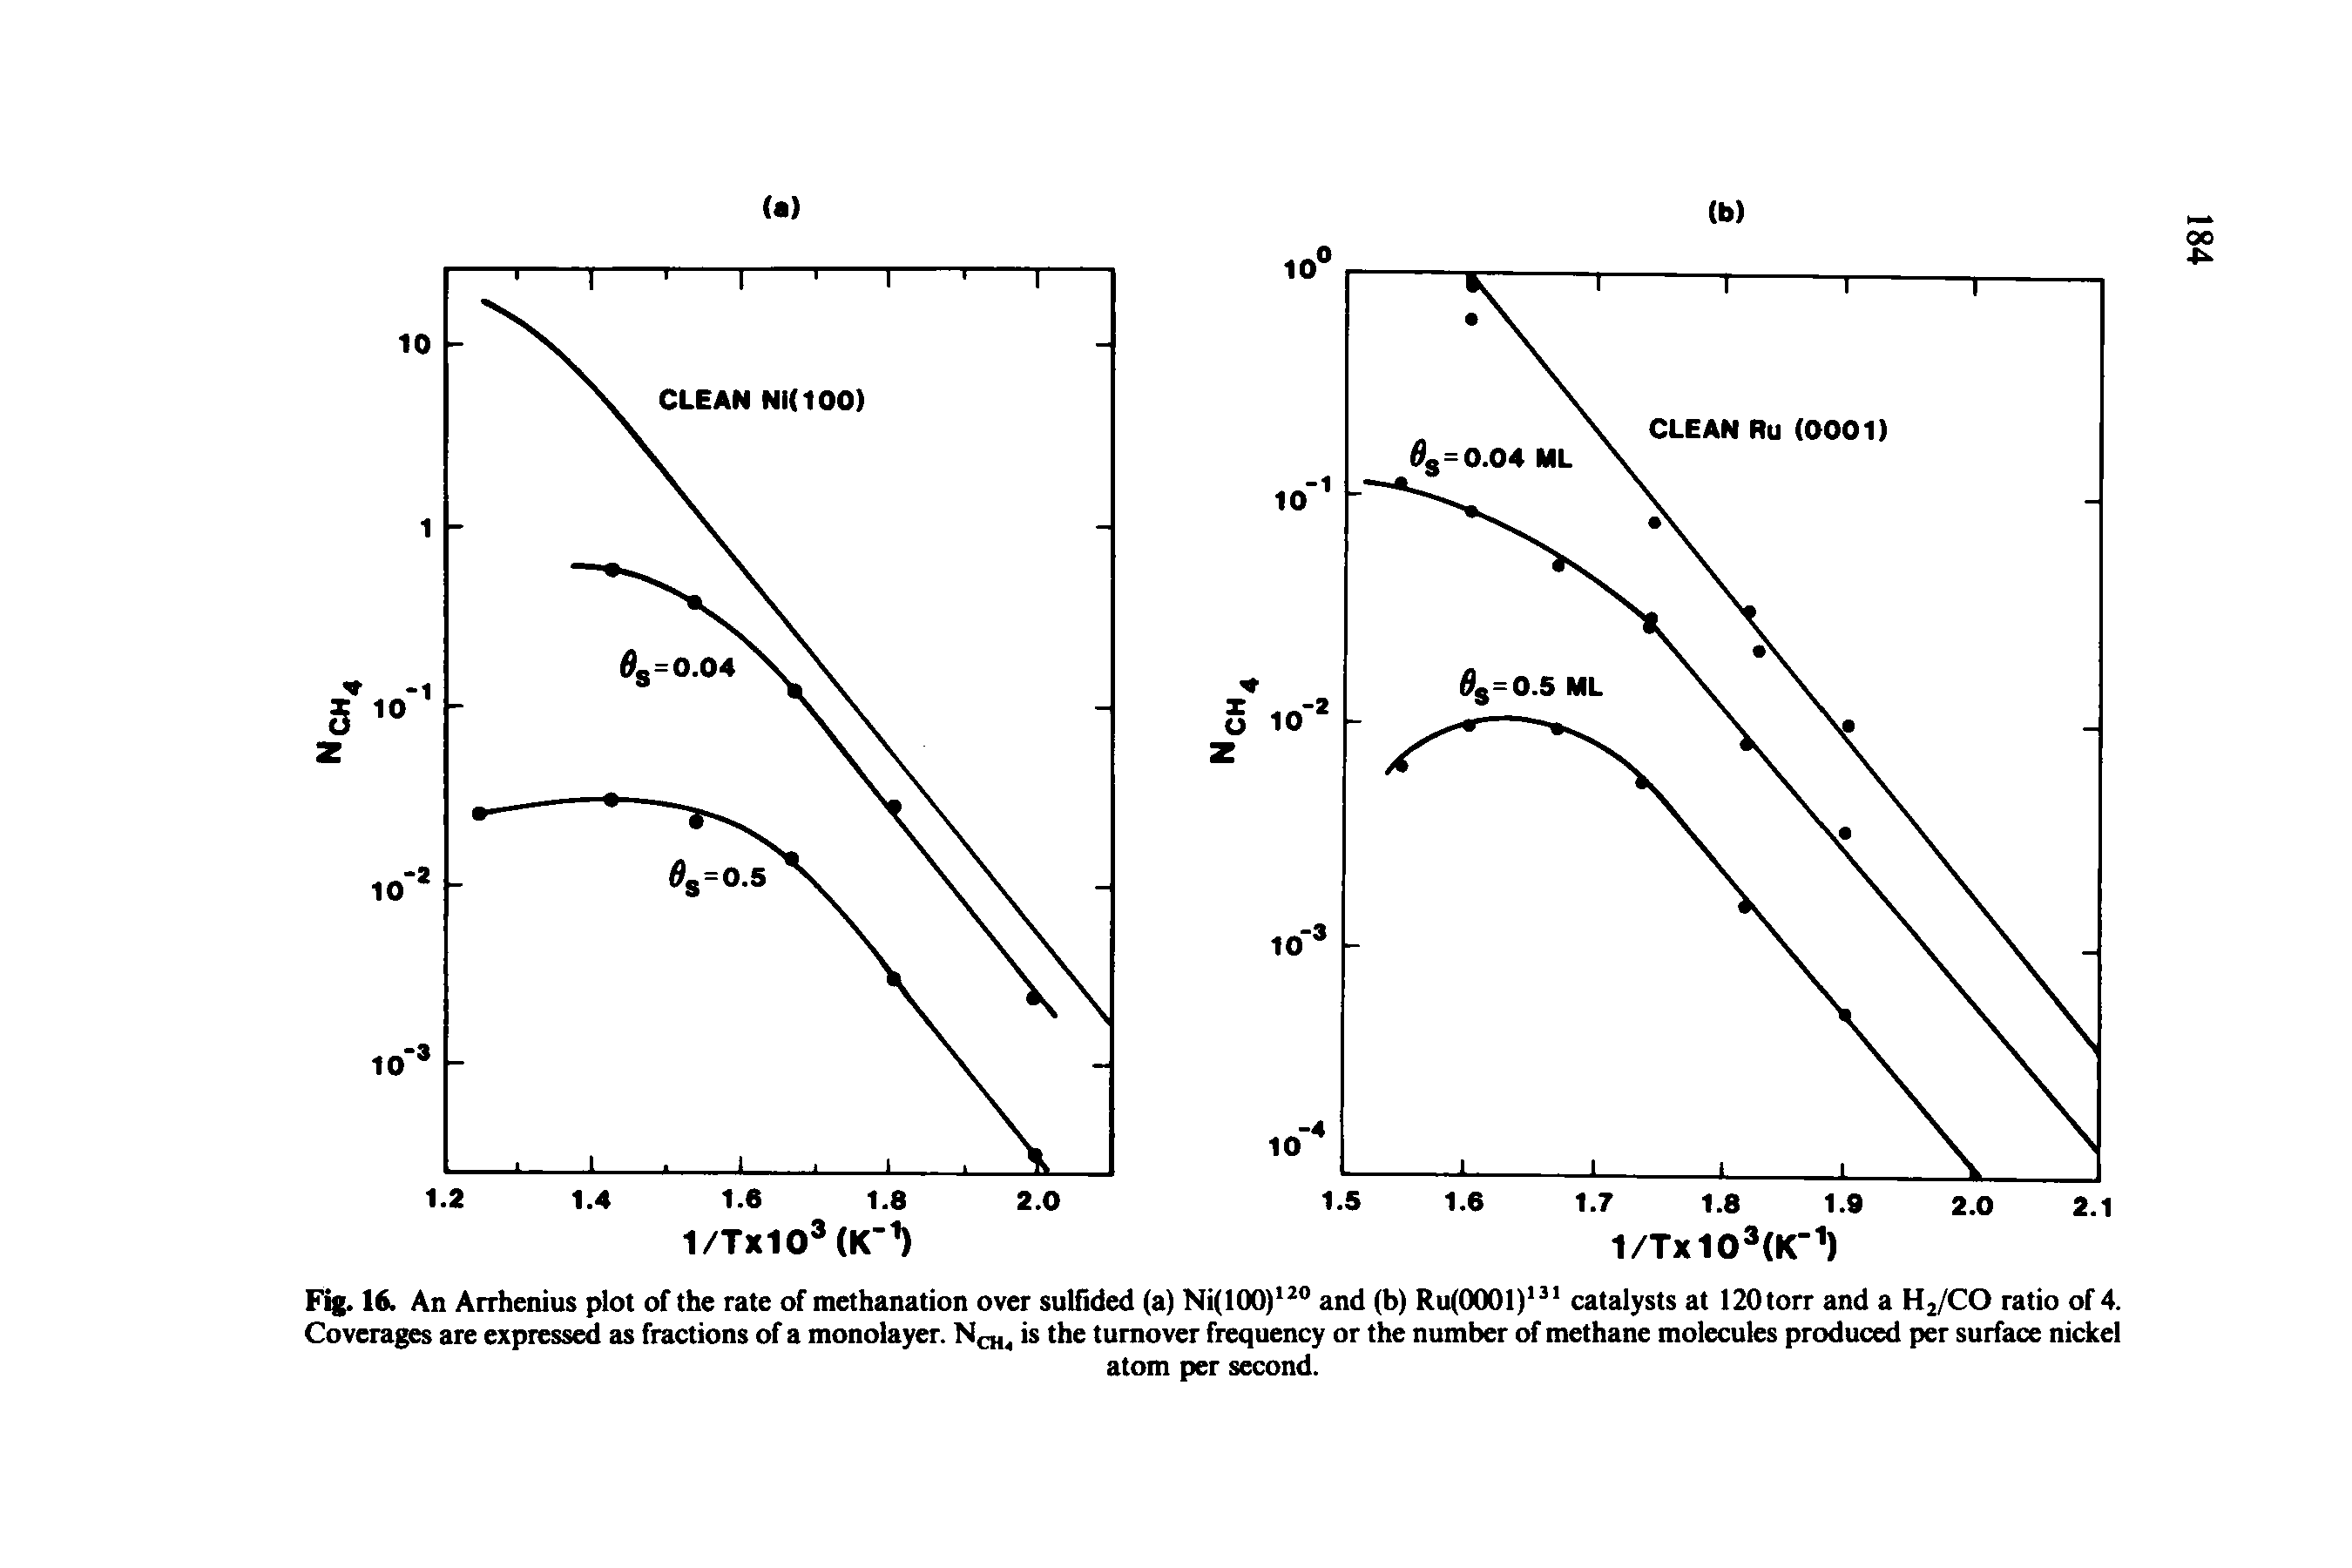 Fig. 16. An Arrhenius plot of the rate of methanation over sulfided (a) Ni(lOO) and (b) Ru(0001) catalysts at 120torr and a Hj/CO ratio of 4. Coverages are expressed as fractions of a monolayer. Nch, is the turnover frequency or the number of methane molecules produced per surface nickel...